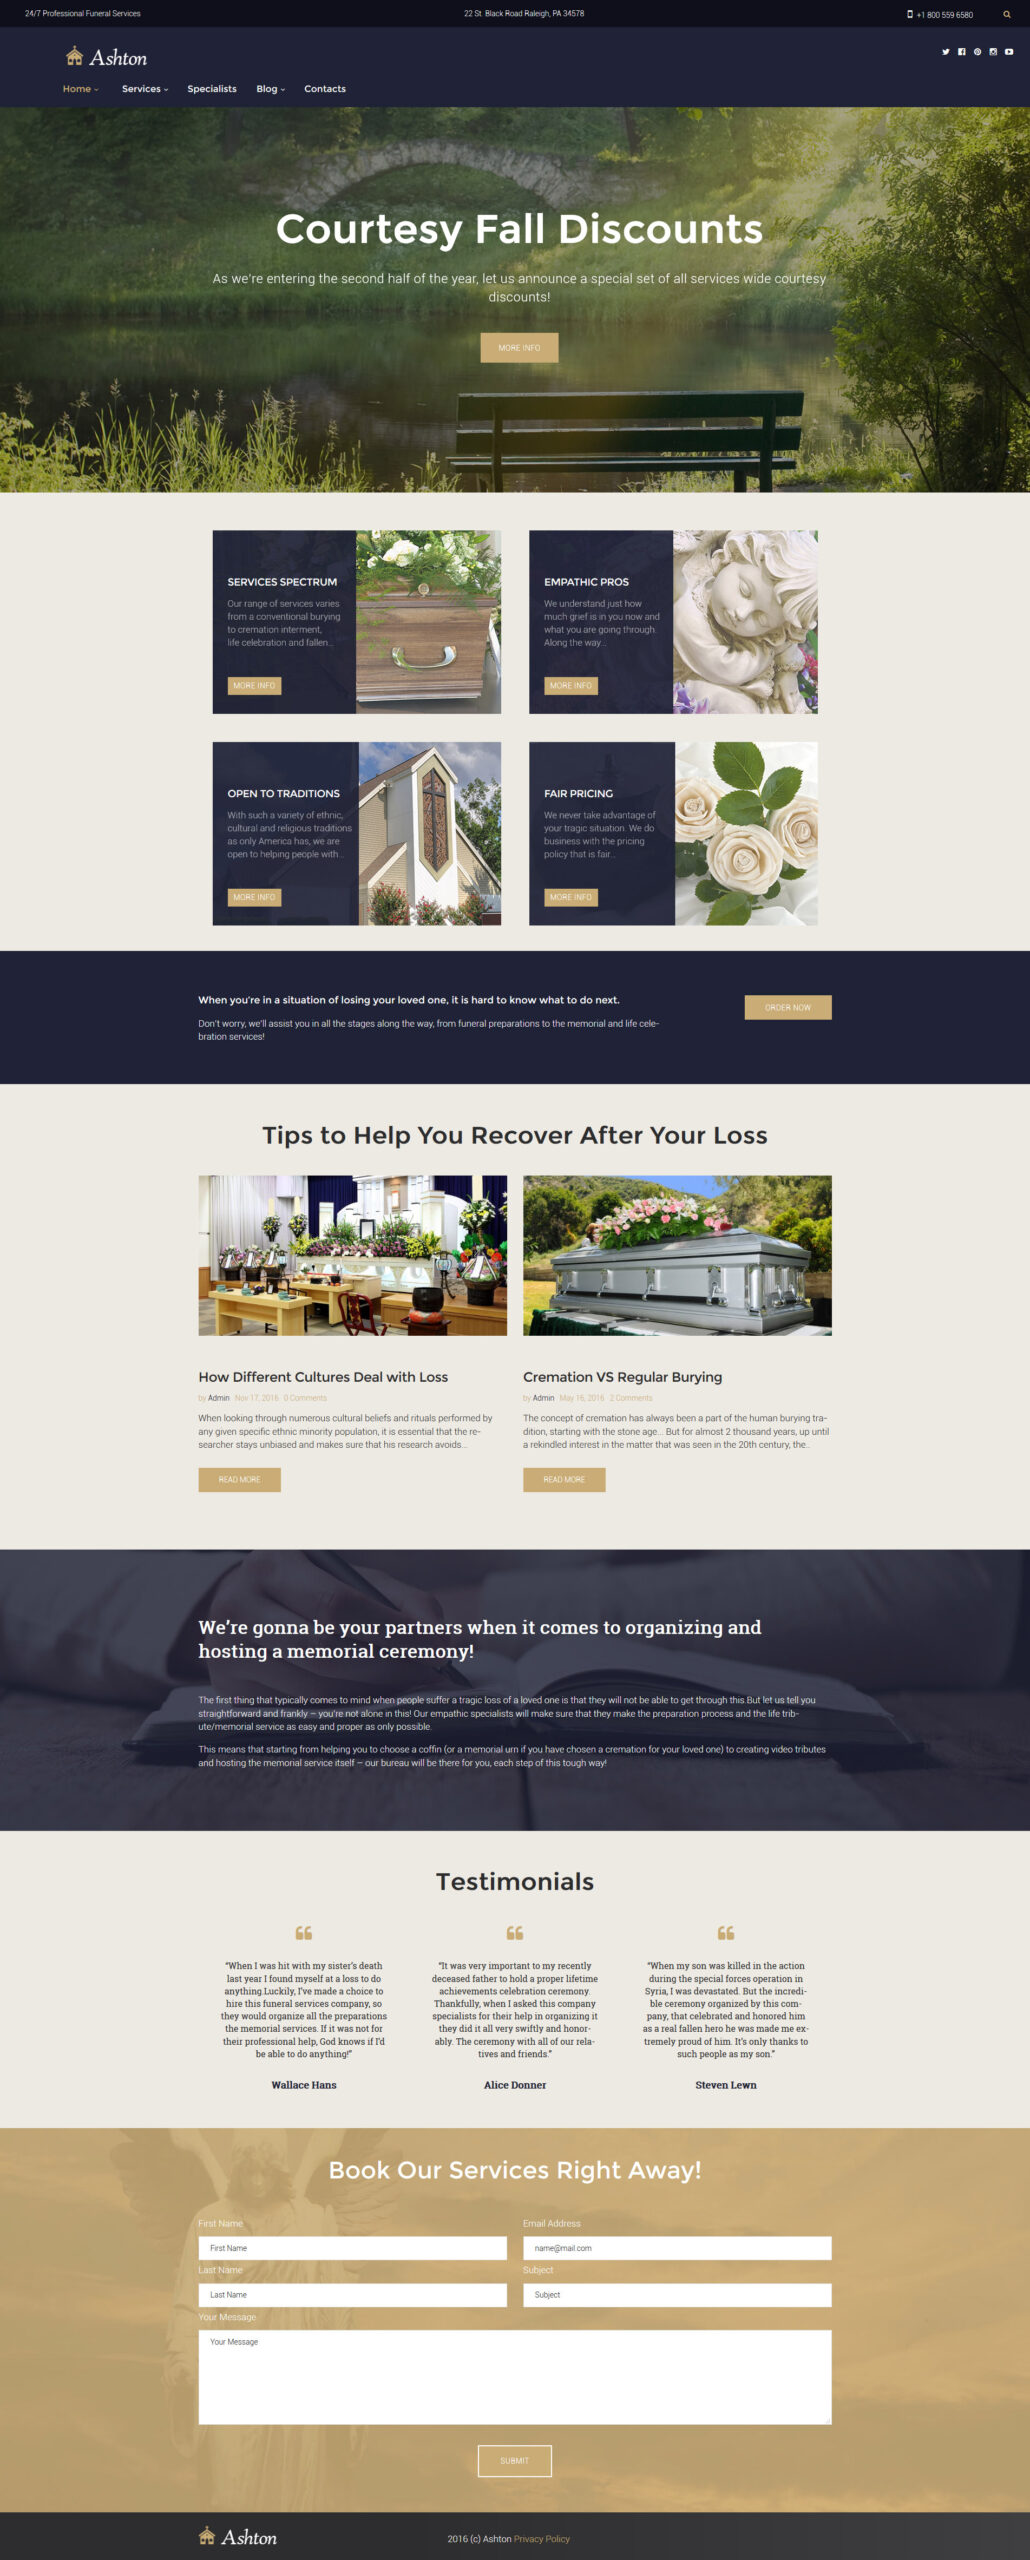 Ashton – Funeral & Cemetery Services WordPress Theme With Funeral Powerpoint Templates